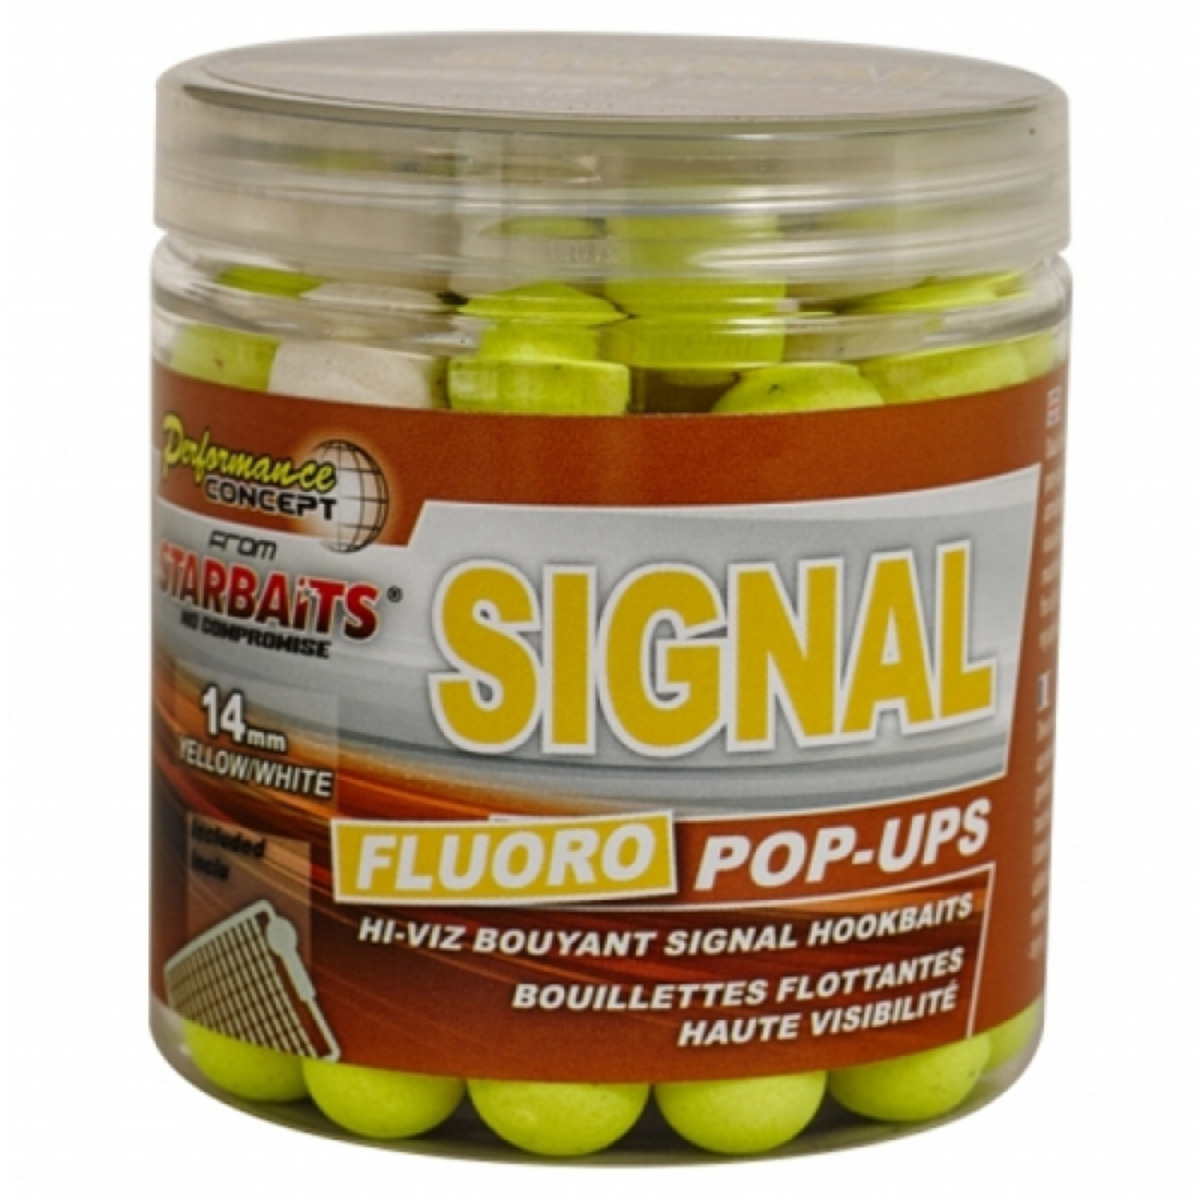 Starbaits Concept Fluo Pop Ups Signal - 14 mm  - 80 g